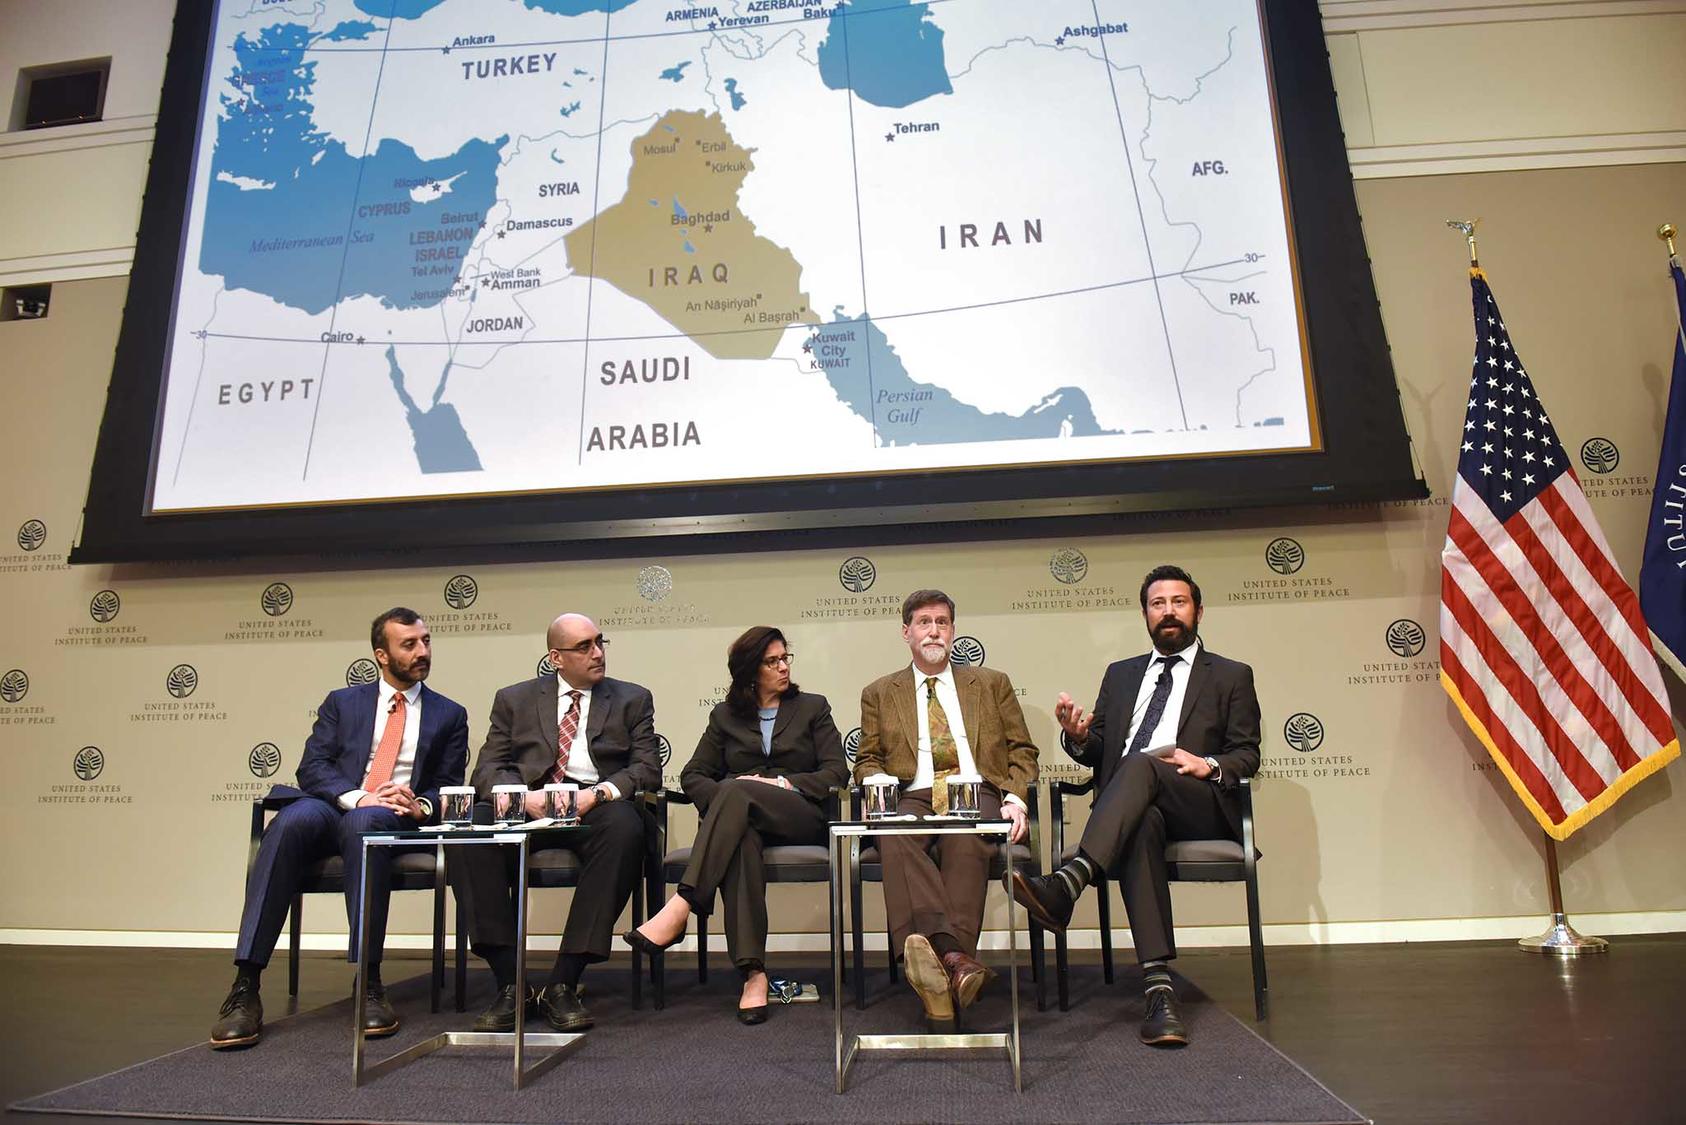 Panelists from the second discussion of the day discussed the region surrounding Iraq and Syria with a map displayed overhead